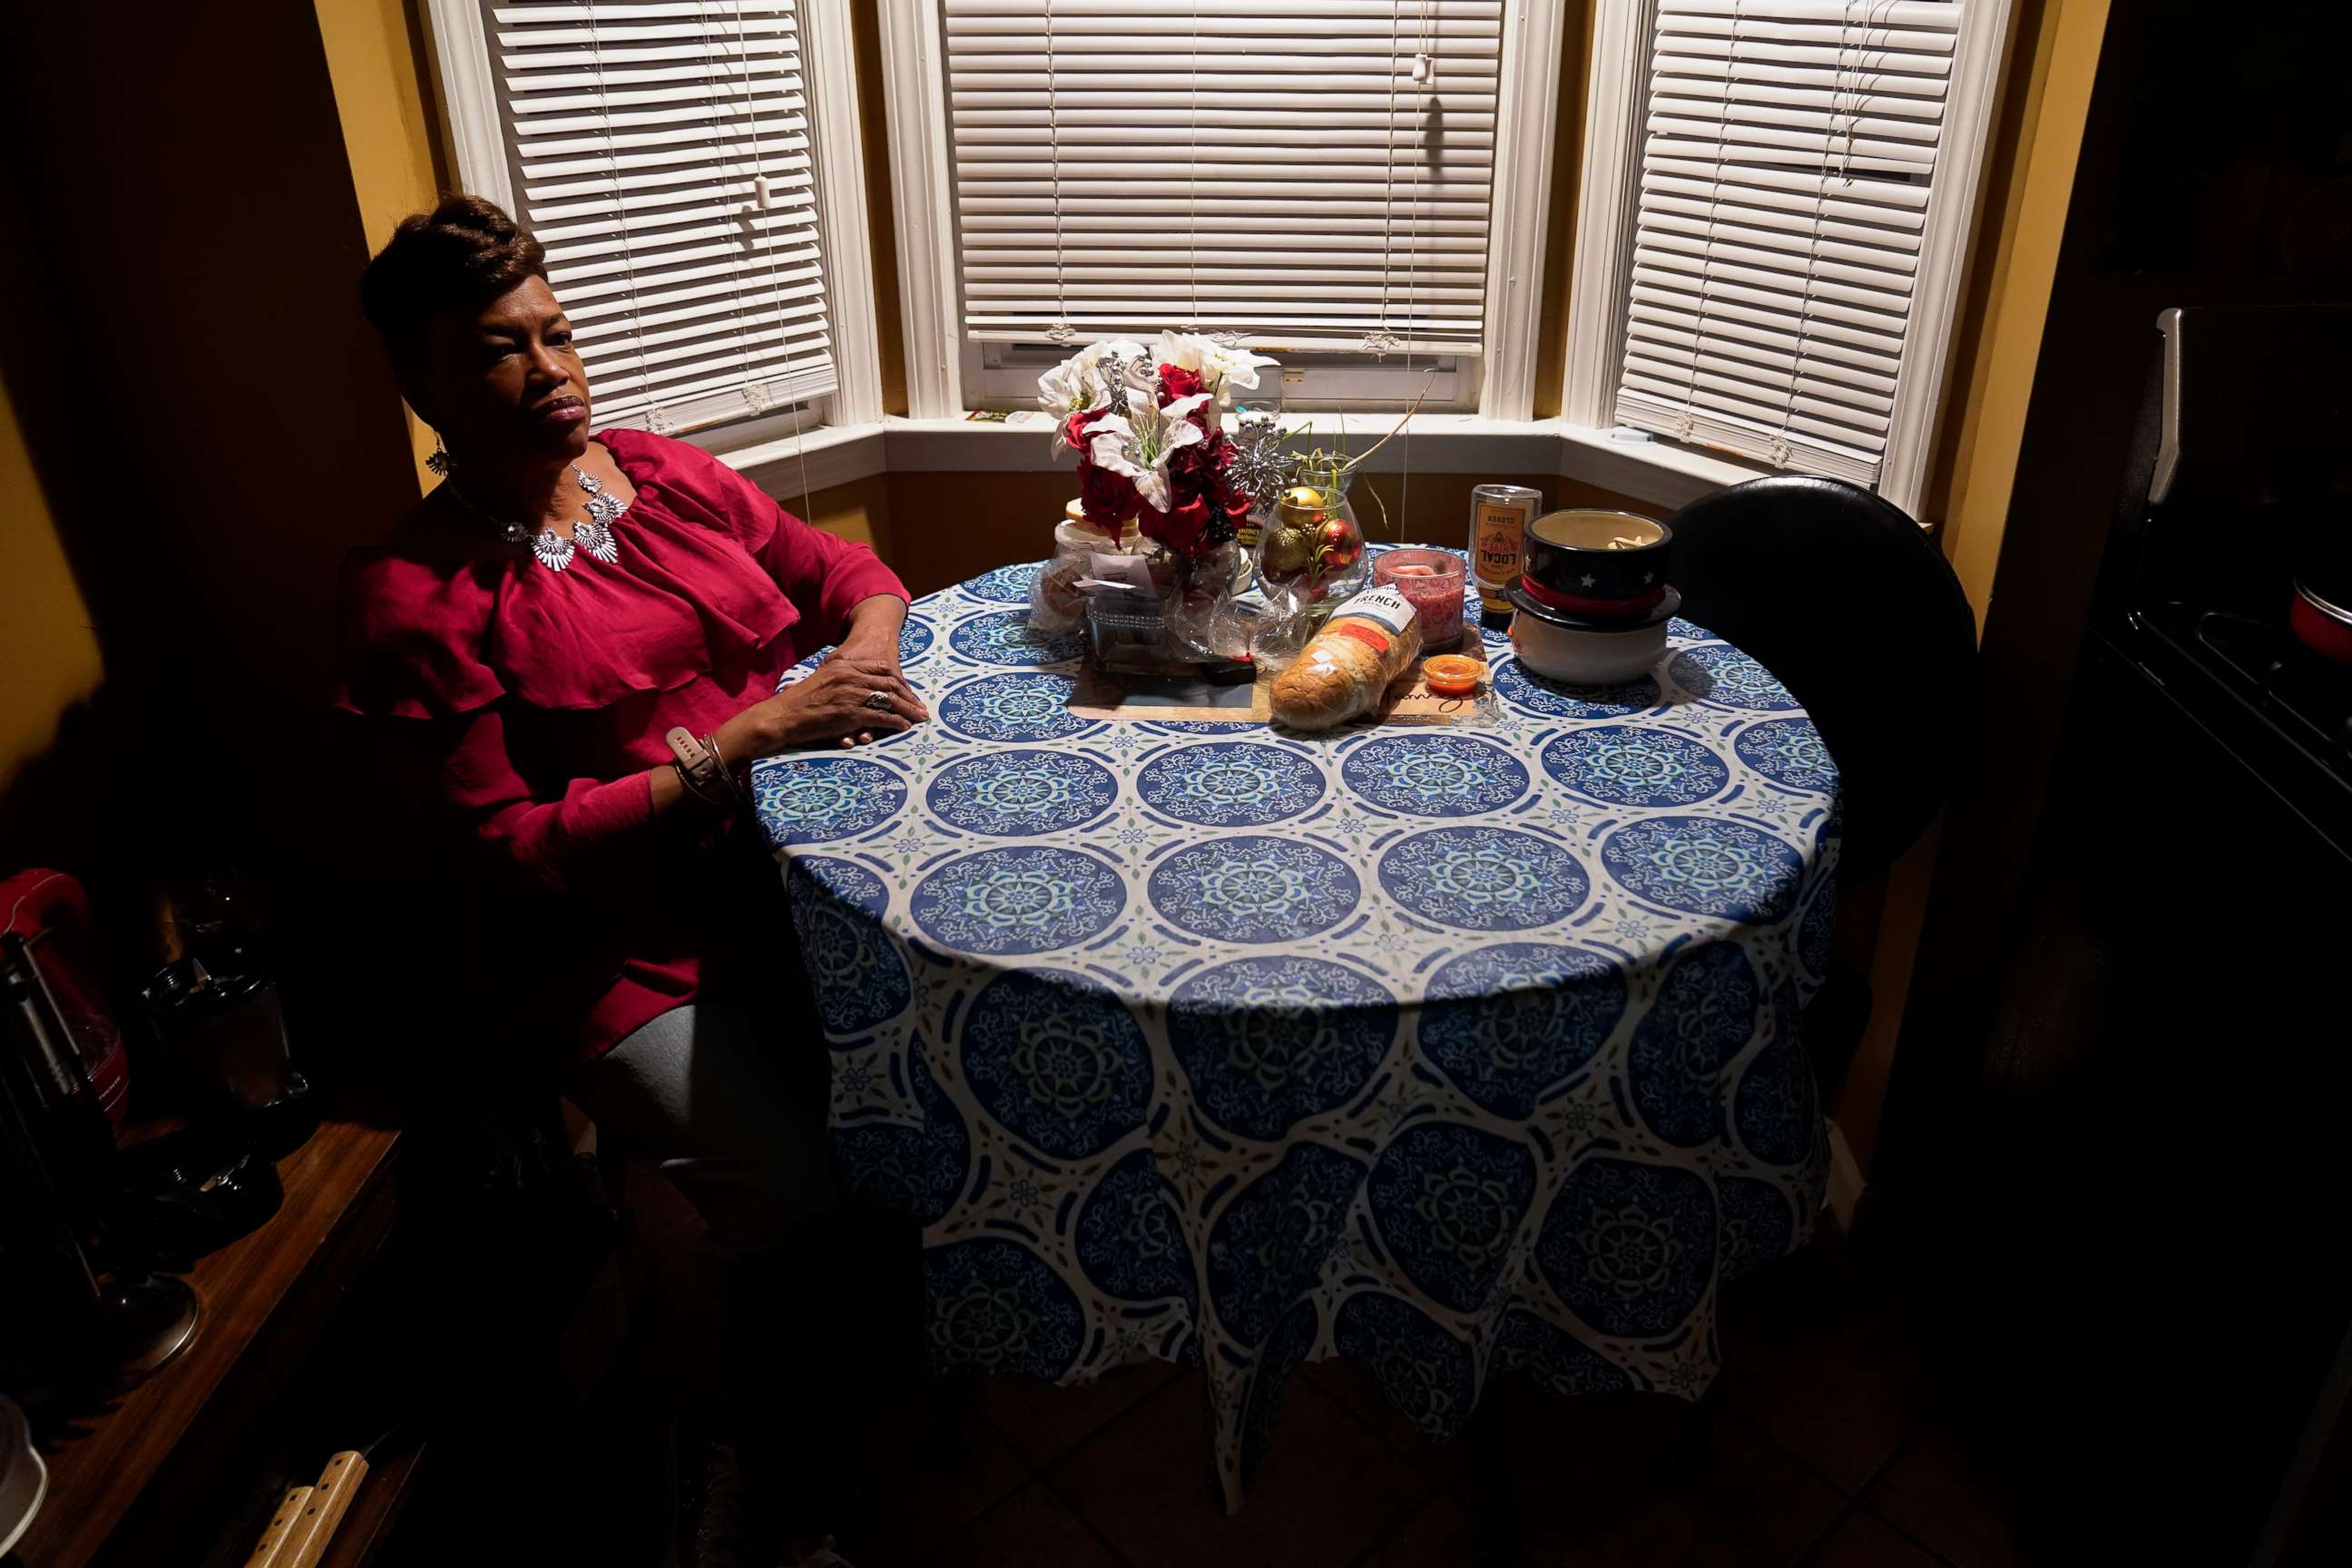 PHOTO: Karla Jefferies sits in her kitchen in Detroit, Friday, March 5, 2021. Jefferies, 64, a retired state worker in Detroit, Michigan, tested positive for COVID-19 in March 2020 and has been bothered by puzzling symptoms ever since.